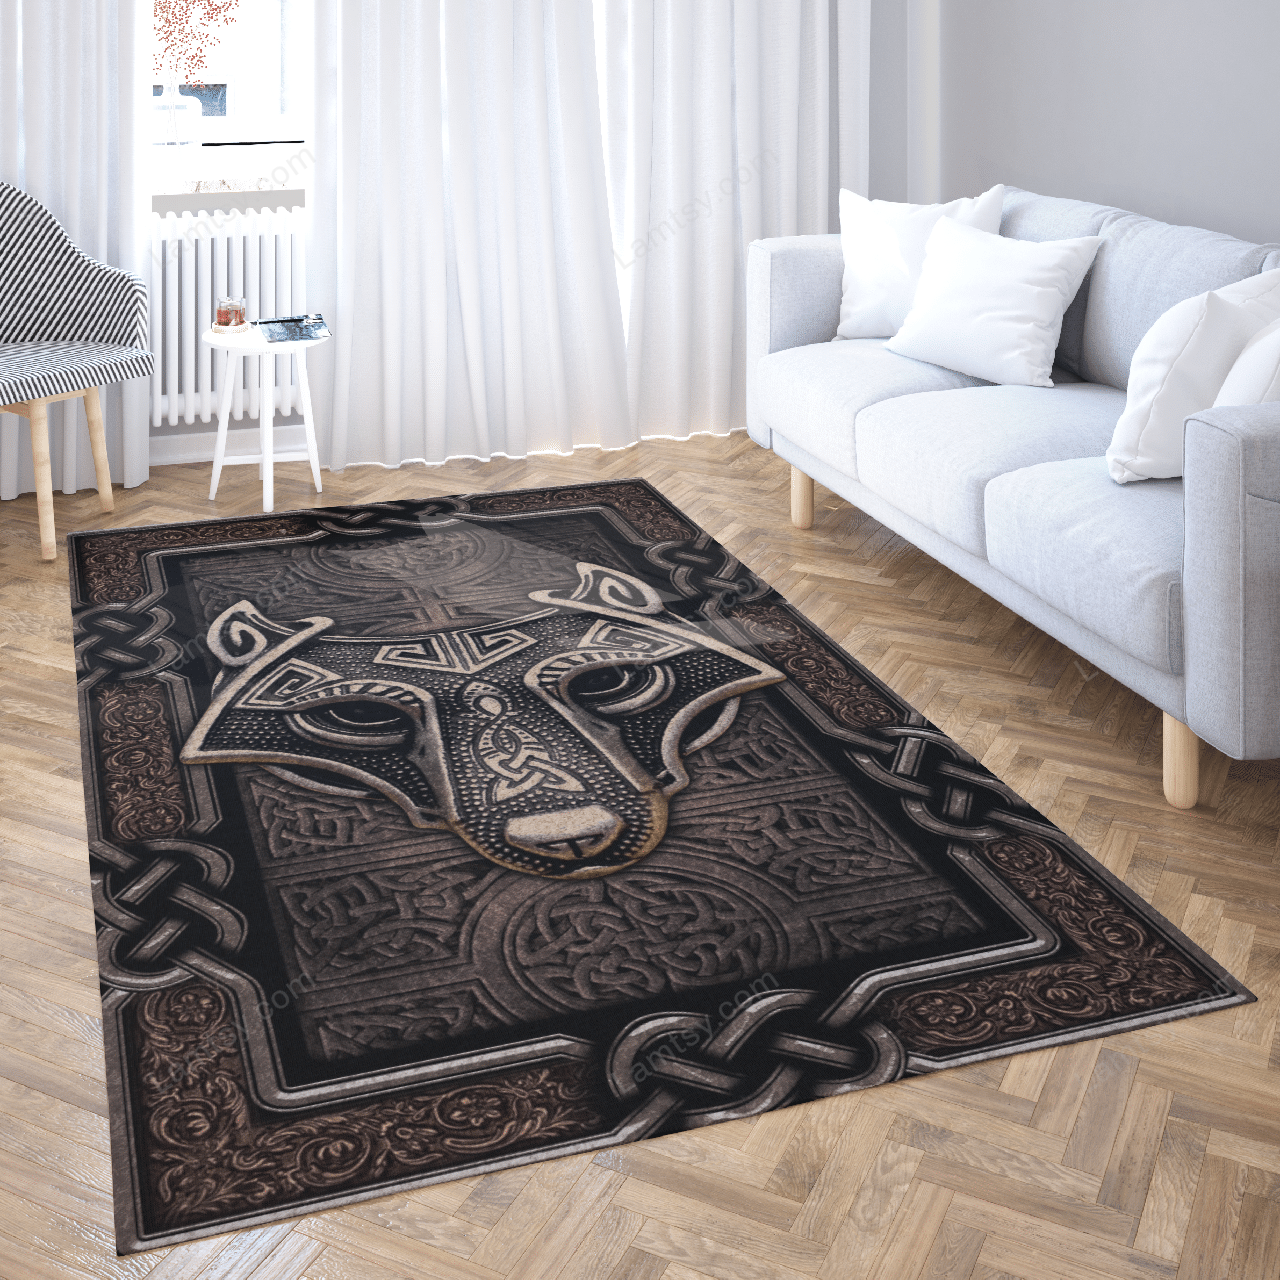 Viking Wolf Rune Rug – LIMITED EDITION